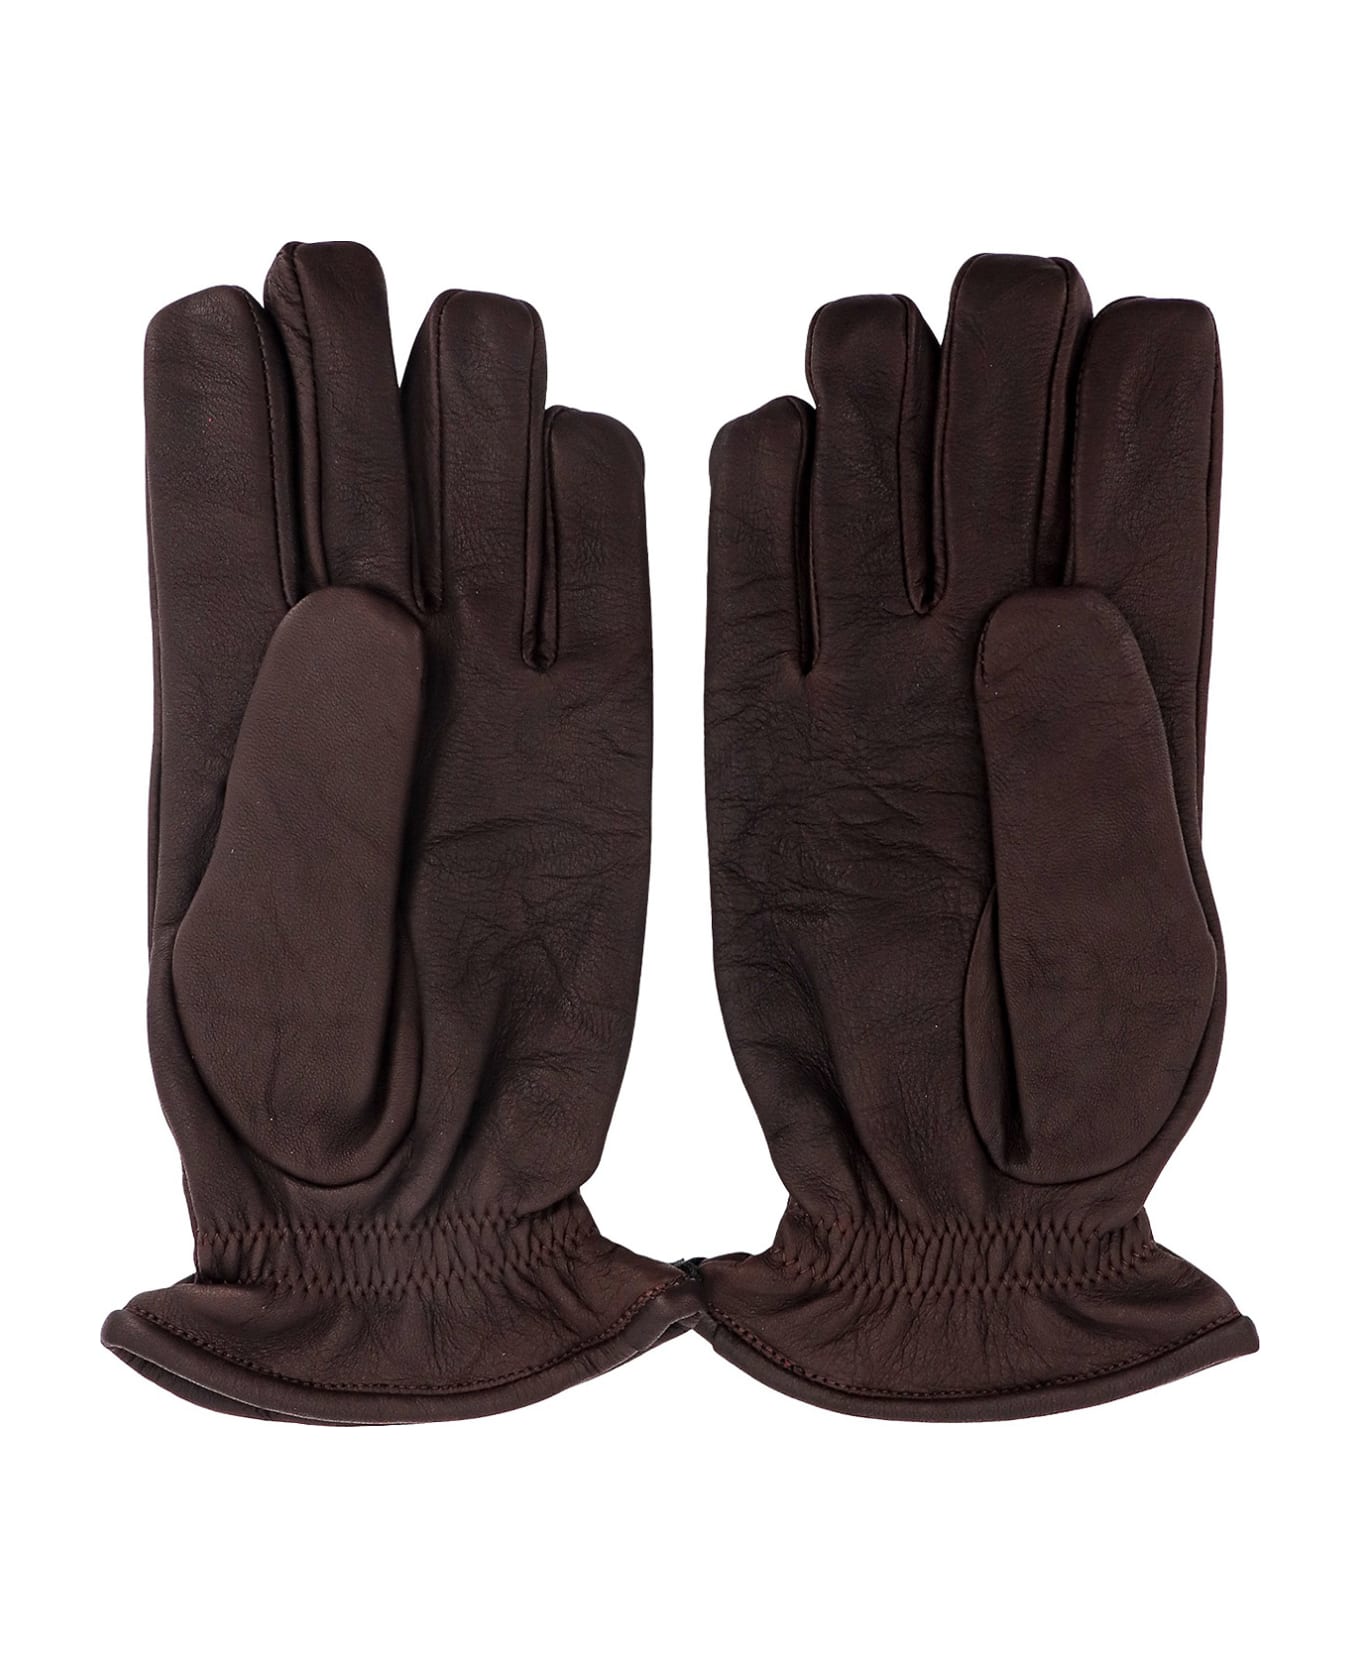 Orciani Gloves - Brown 手袋